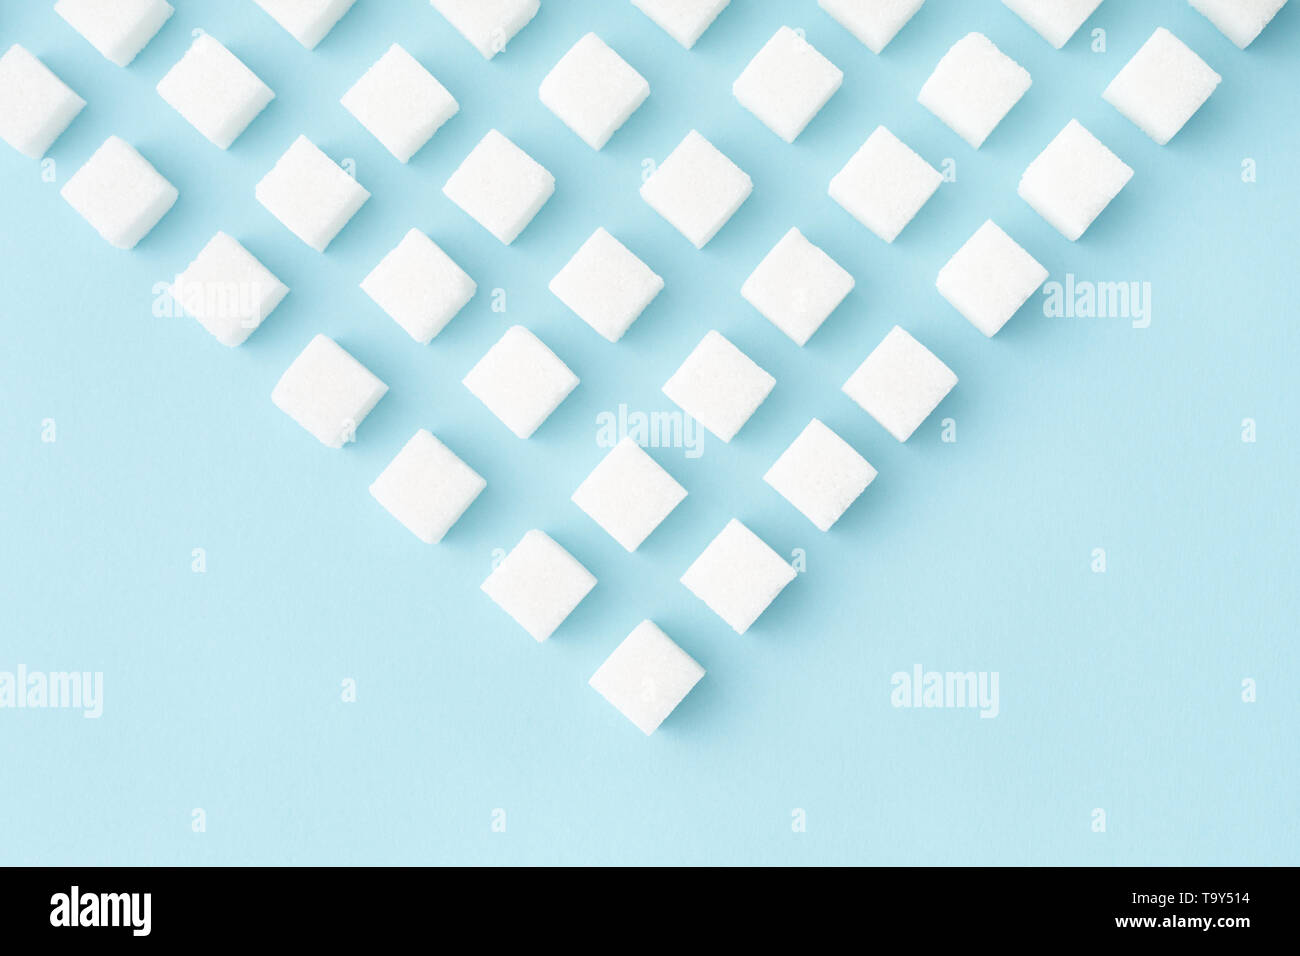 Sugar cubes geometry pattern on pastel blue background with copy space. Abstract, flat lay, minimal style. Stock Photo